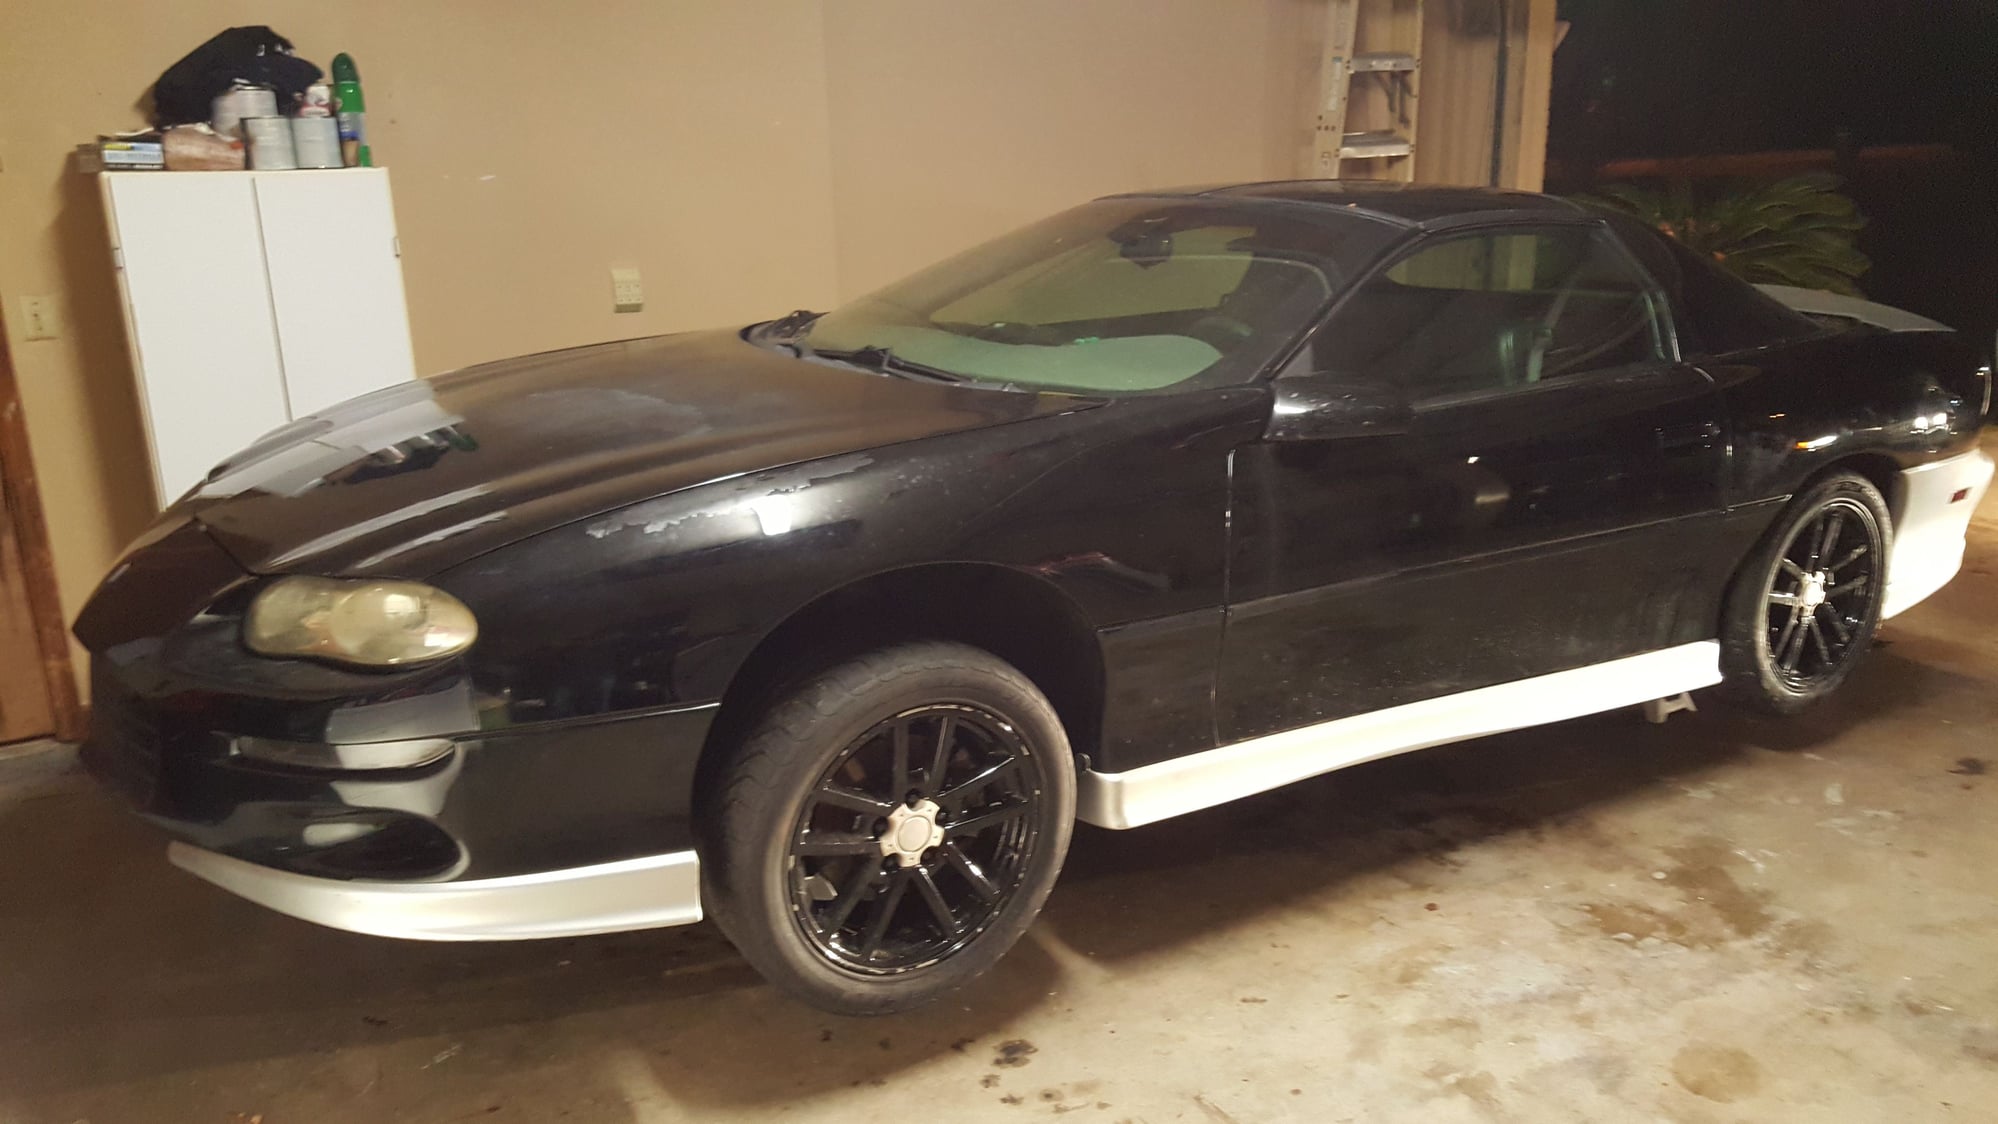 1998 Chevrolet Camaro - 1998 Z28 with Fitech 600hp and many new parts take a look - Used - VIN 2G1FP22G8W21219 - 260,000 Miles - 8 cyl - 2WD - Manual - Coupe - Black - Yonkers, NY 10701, United States